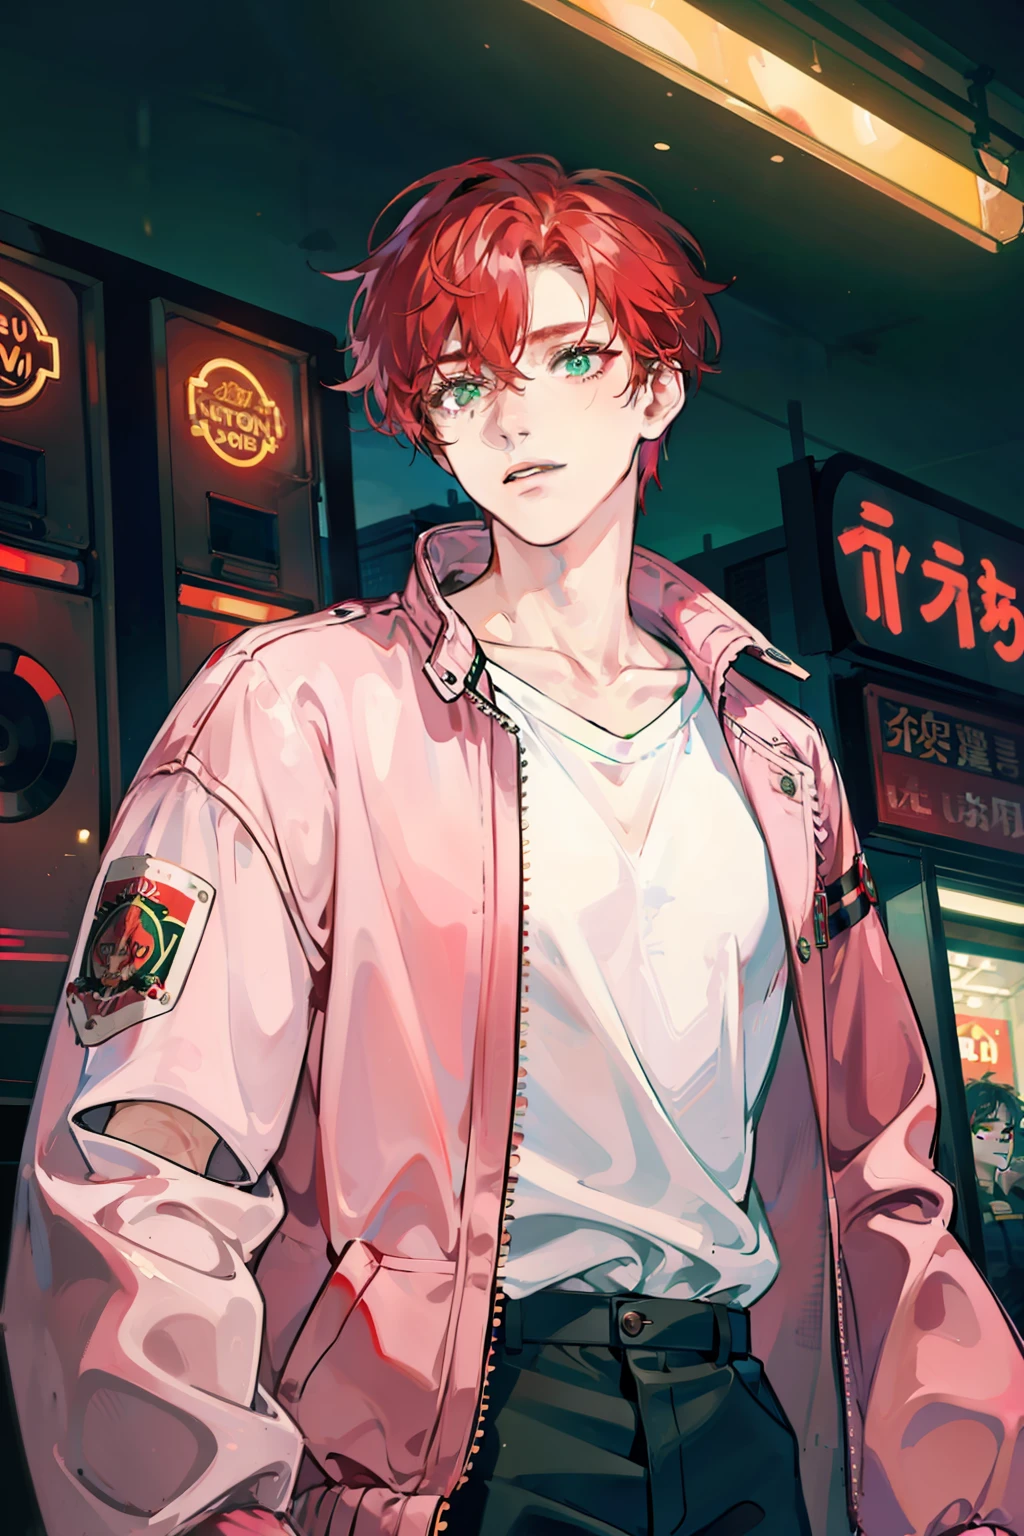 A young man with messy blood red hair and green eyes wearing a shock pink and white bomber jacket in an arcade full of neon Tokyo lights at night